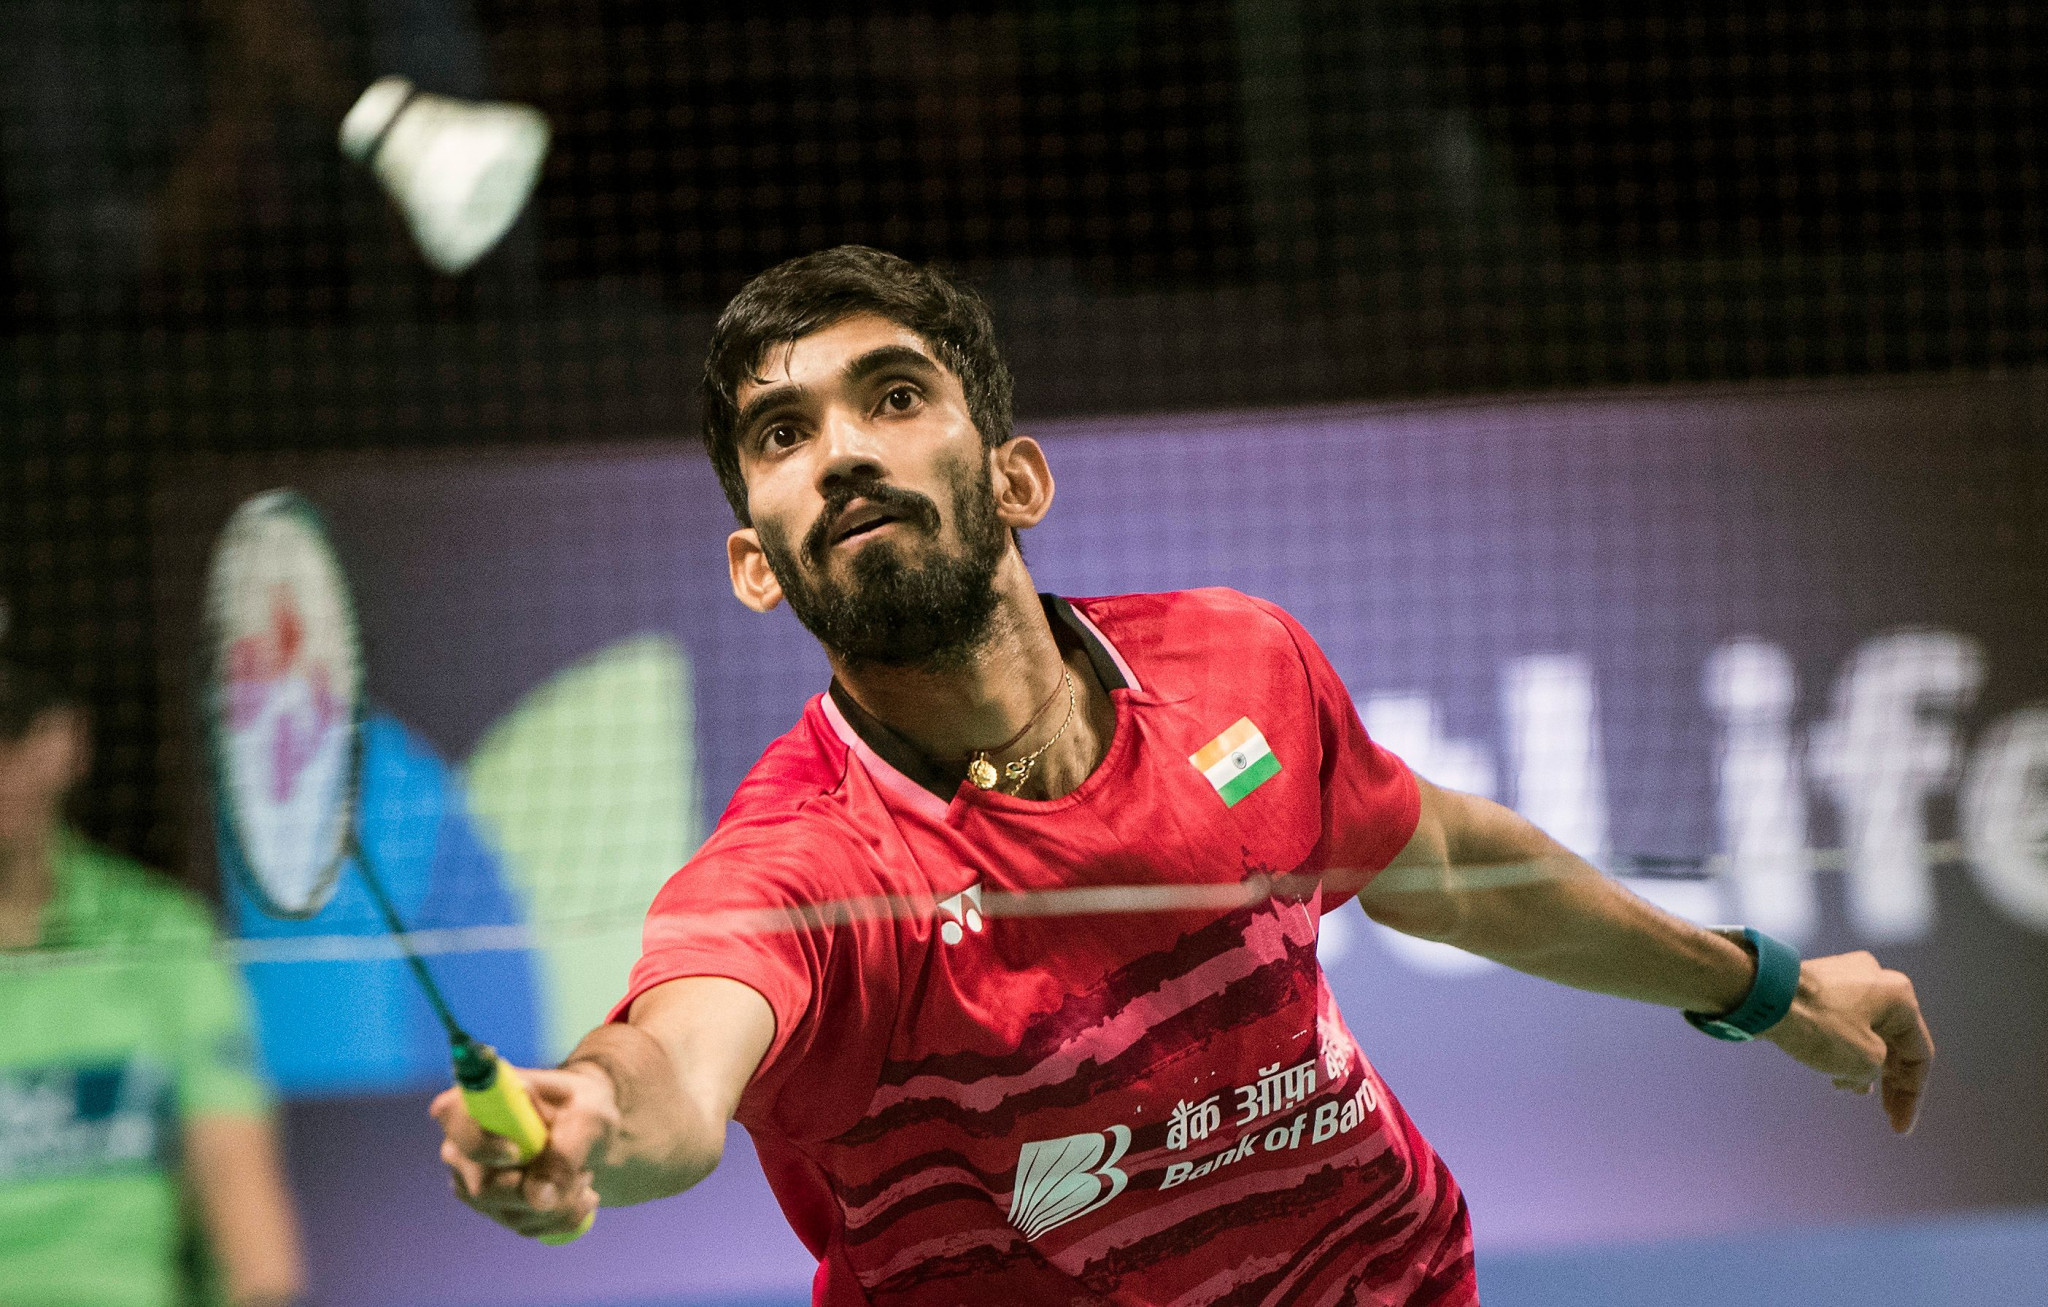 Srikanth and Intanon hoping to carry momentum into BWF French Open